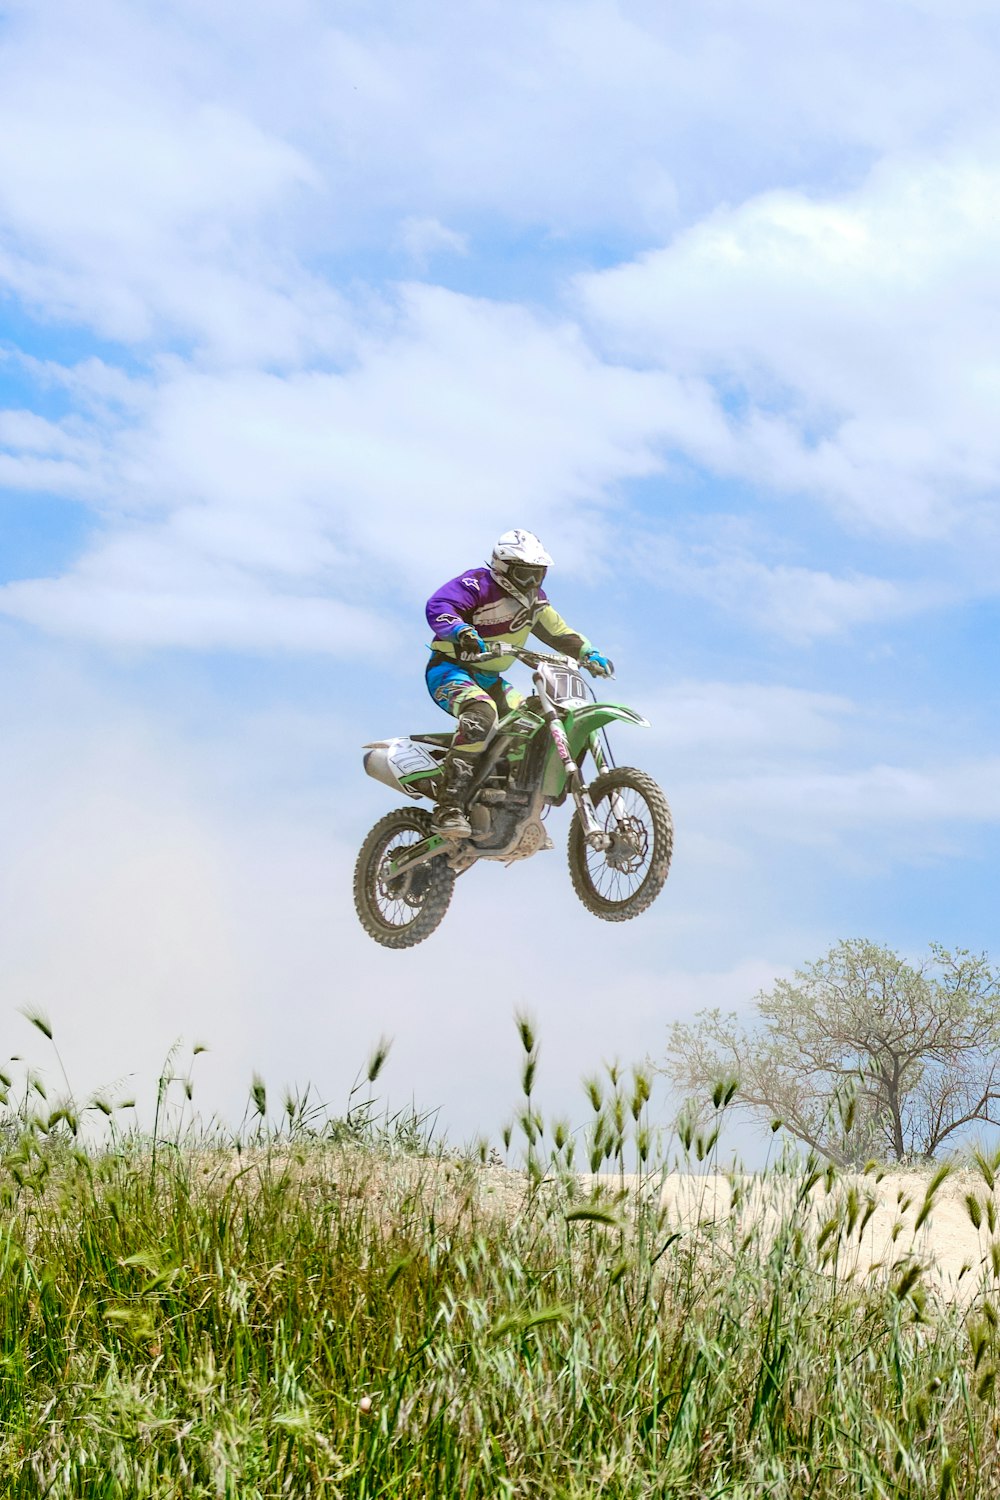 man riding motocross dirt bike on green grass field under white clouds and blue sky during